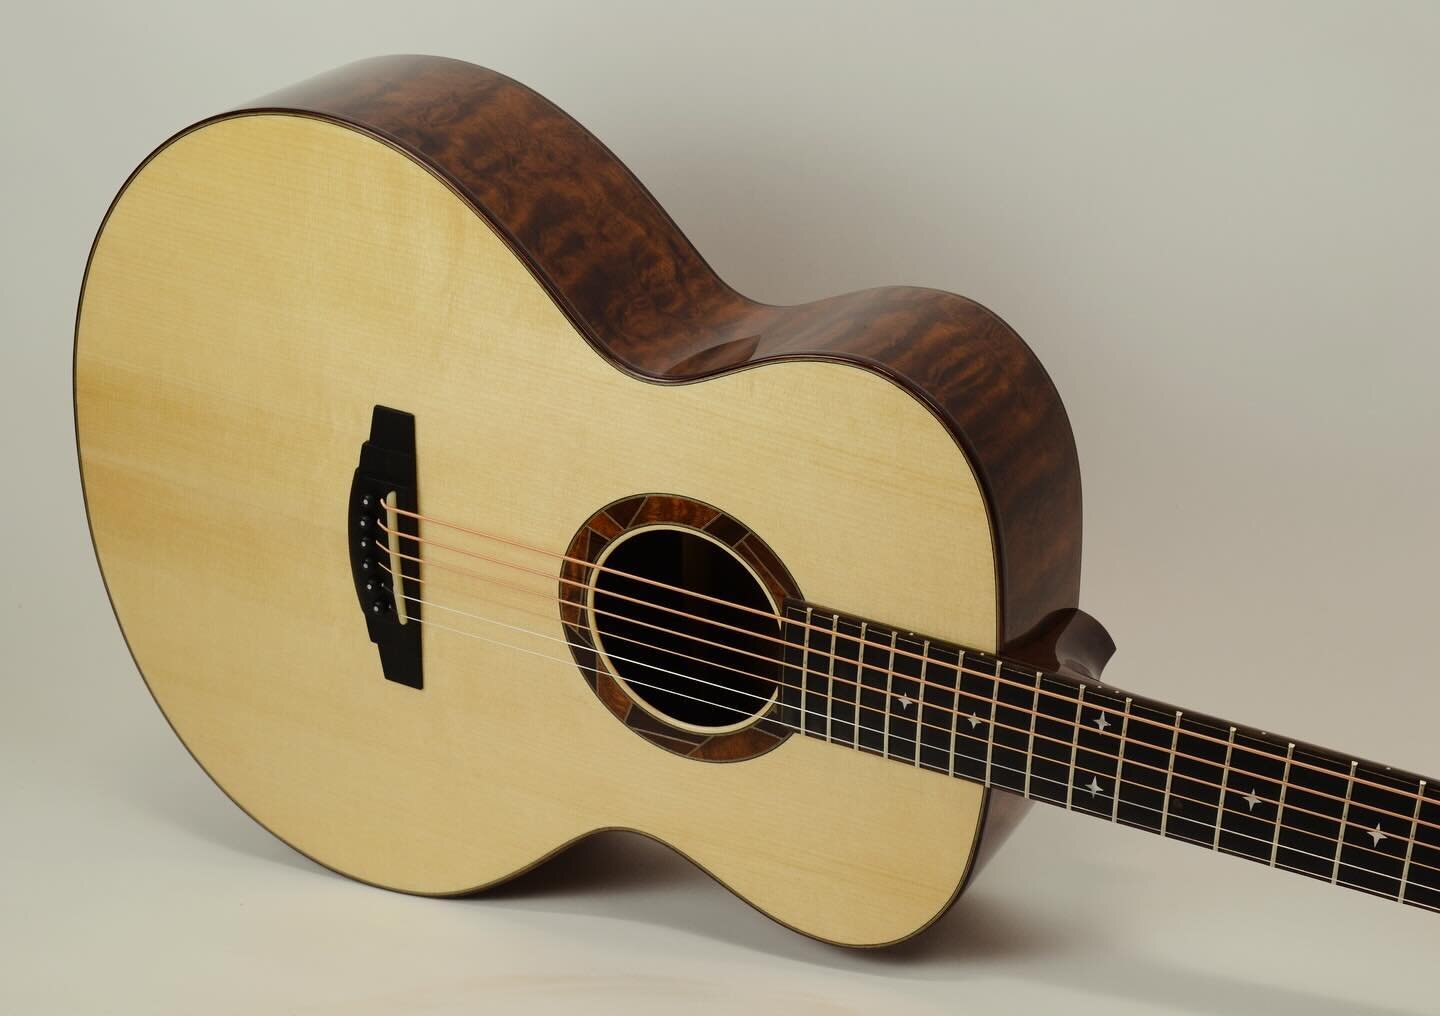 Baritone 17&rdquo; Jumbo
-
The Tree mahogany, Adirondack spruce top, X-braced with 3 tone bars.  Very &ldquo;piano-like&rdquo; low end tone; the clarity/focus of the low B string is really something!  Some very interesting overtones in the higher reg